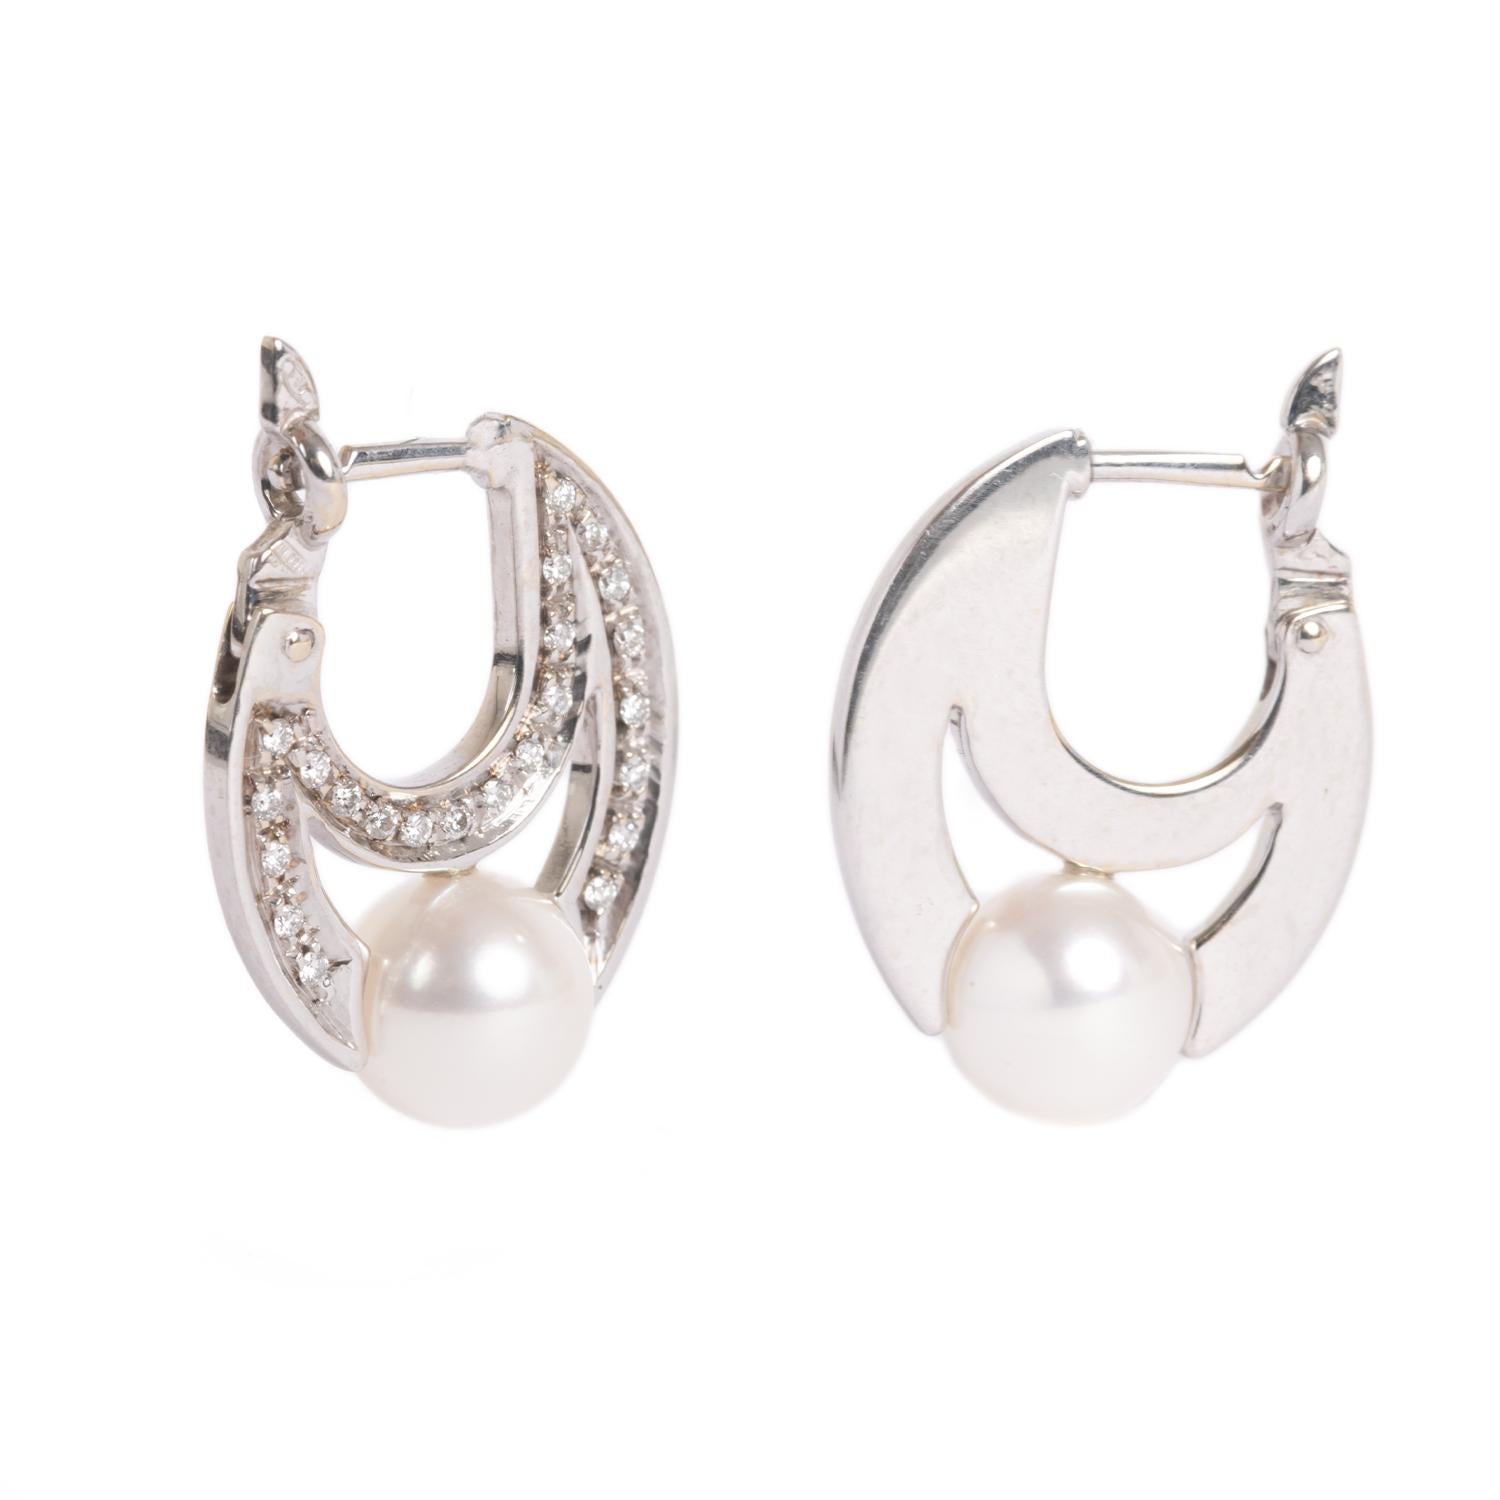 Beautiful earrings by the Italian designer Giancarlo Montebello. The earrings were designed directly for our Enrico Trizio 1868 jewelry. A very elegant pair of white gold earrings 